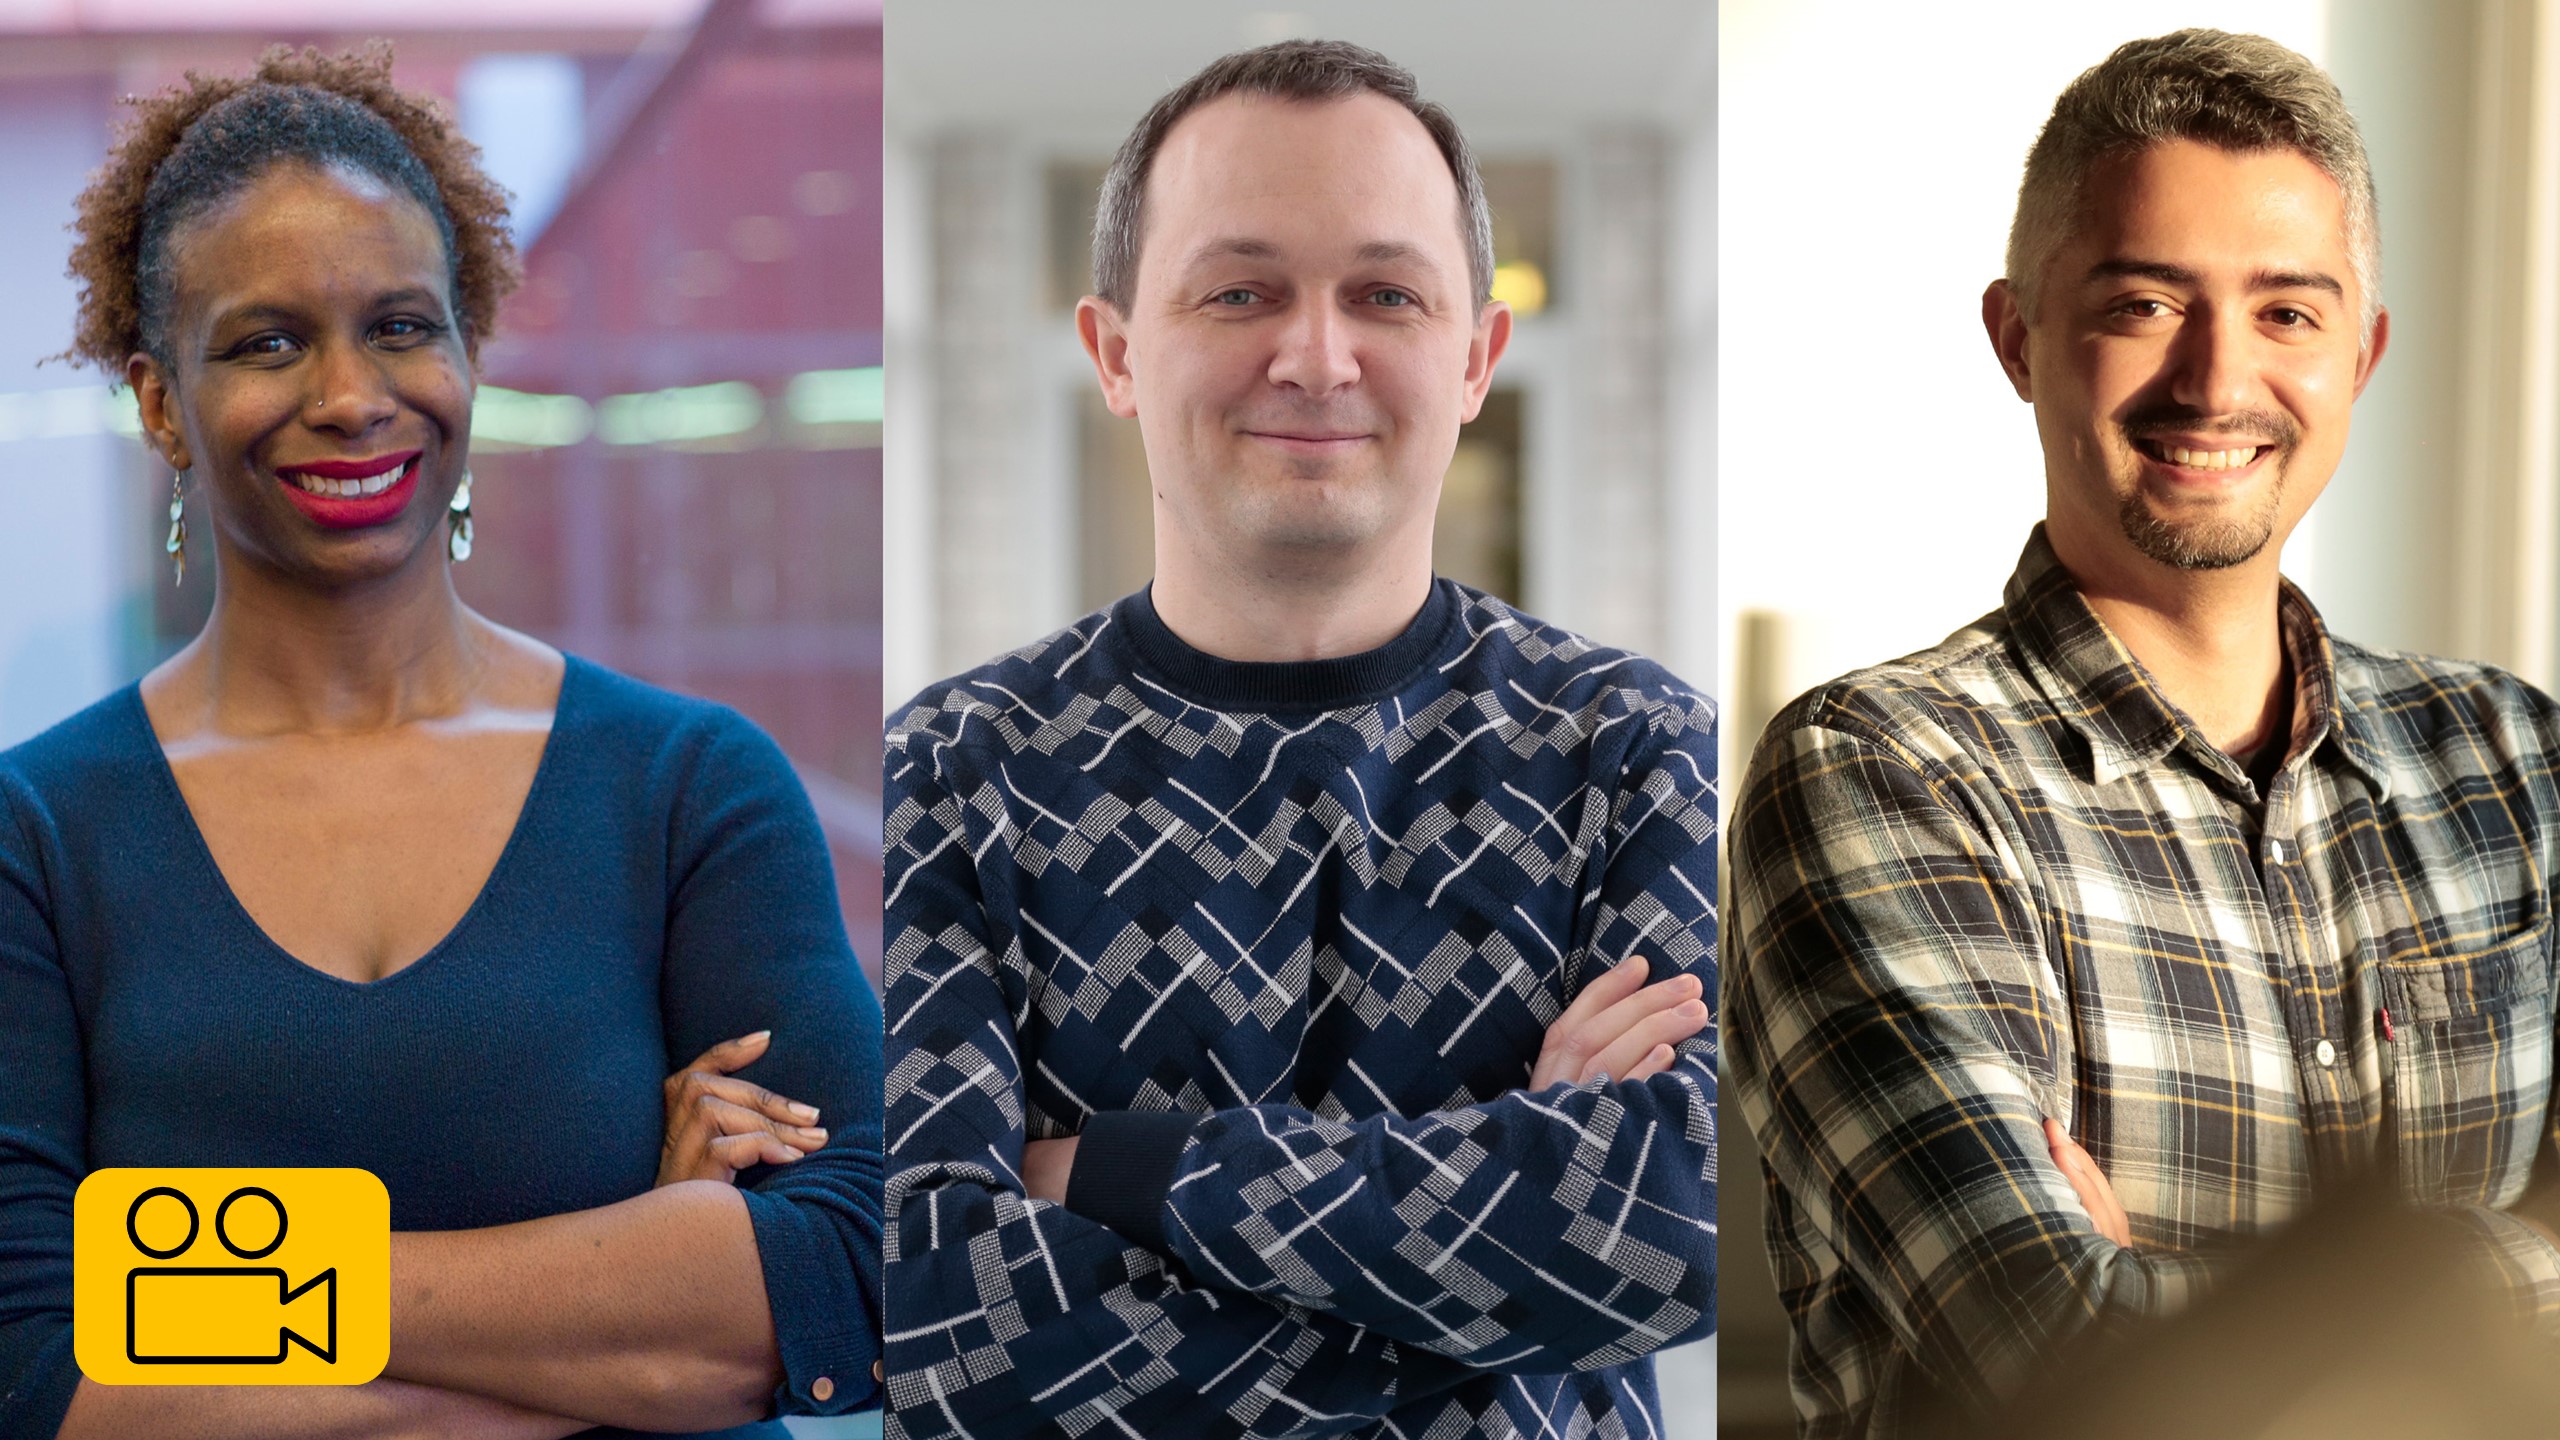 Portrait photos of the three researchers you can follow. 